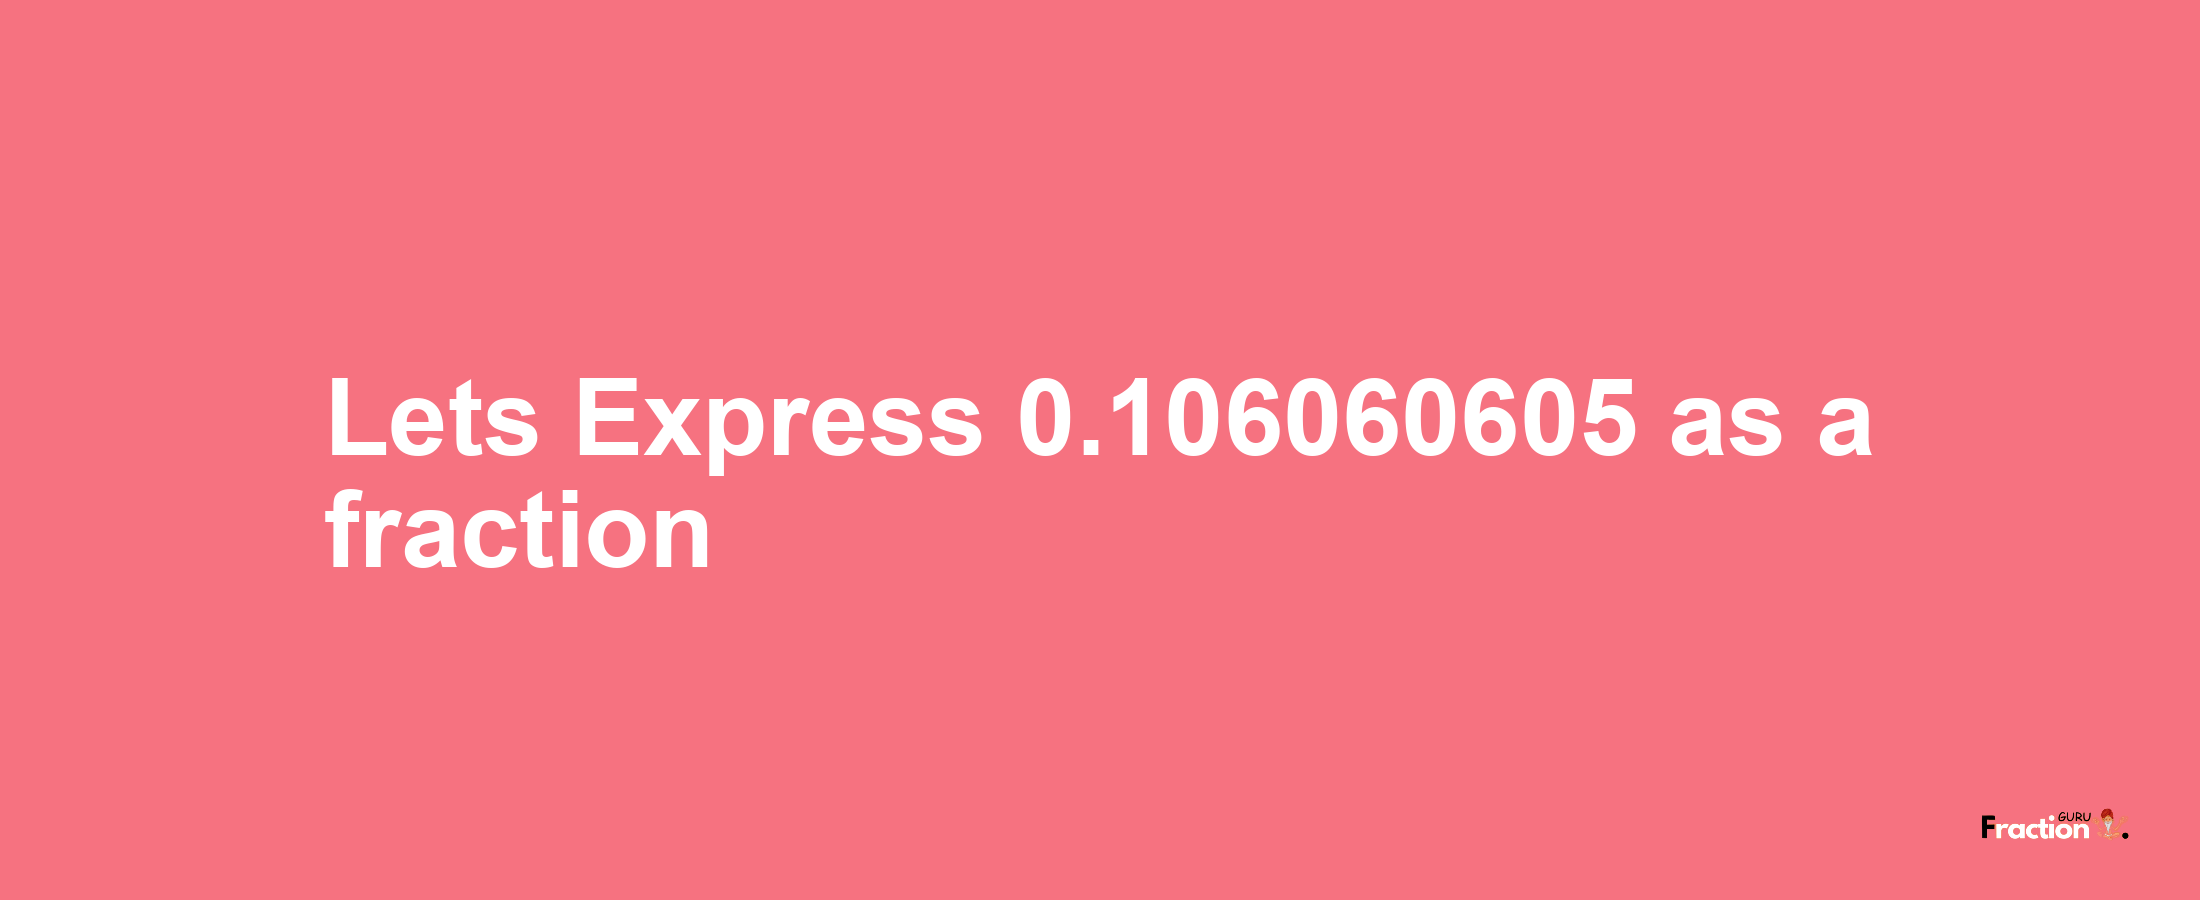 Lets Express 0.106060605 as afraction